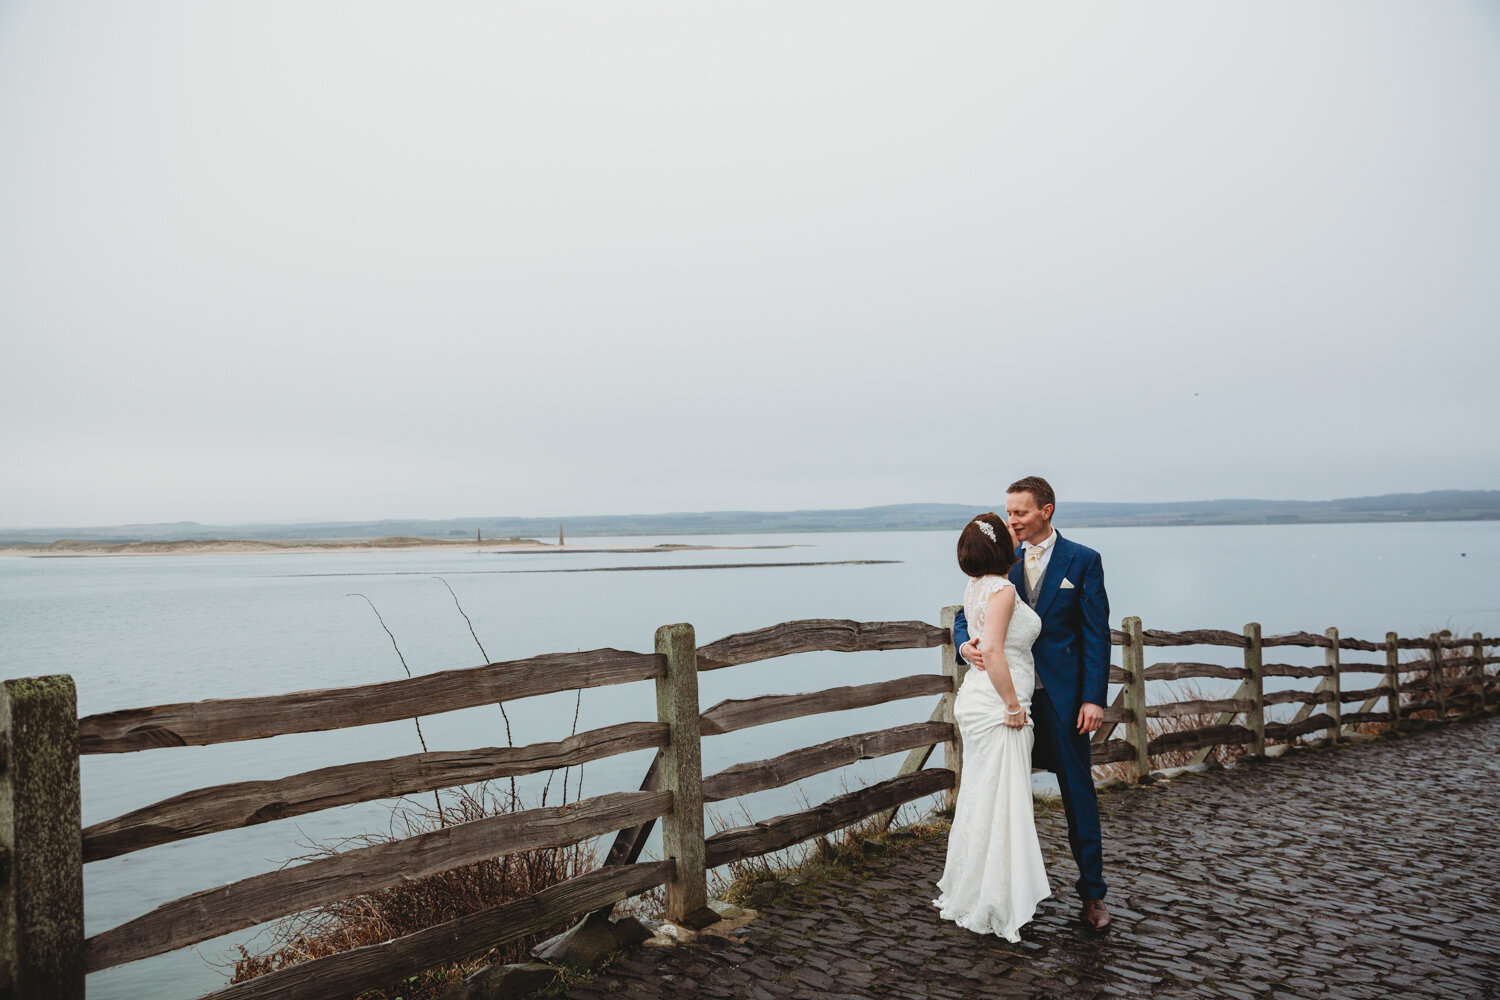 PICTORIAL_wedding-lindisfarne-castle-northumberland-photographer-mead-locally-sourced-holy-island-18.jpg